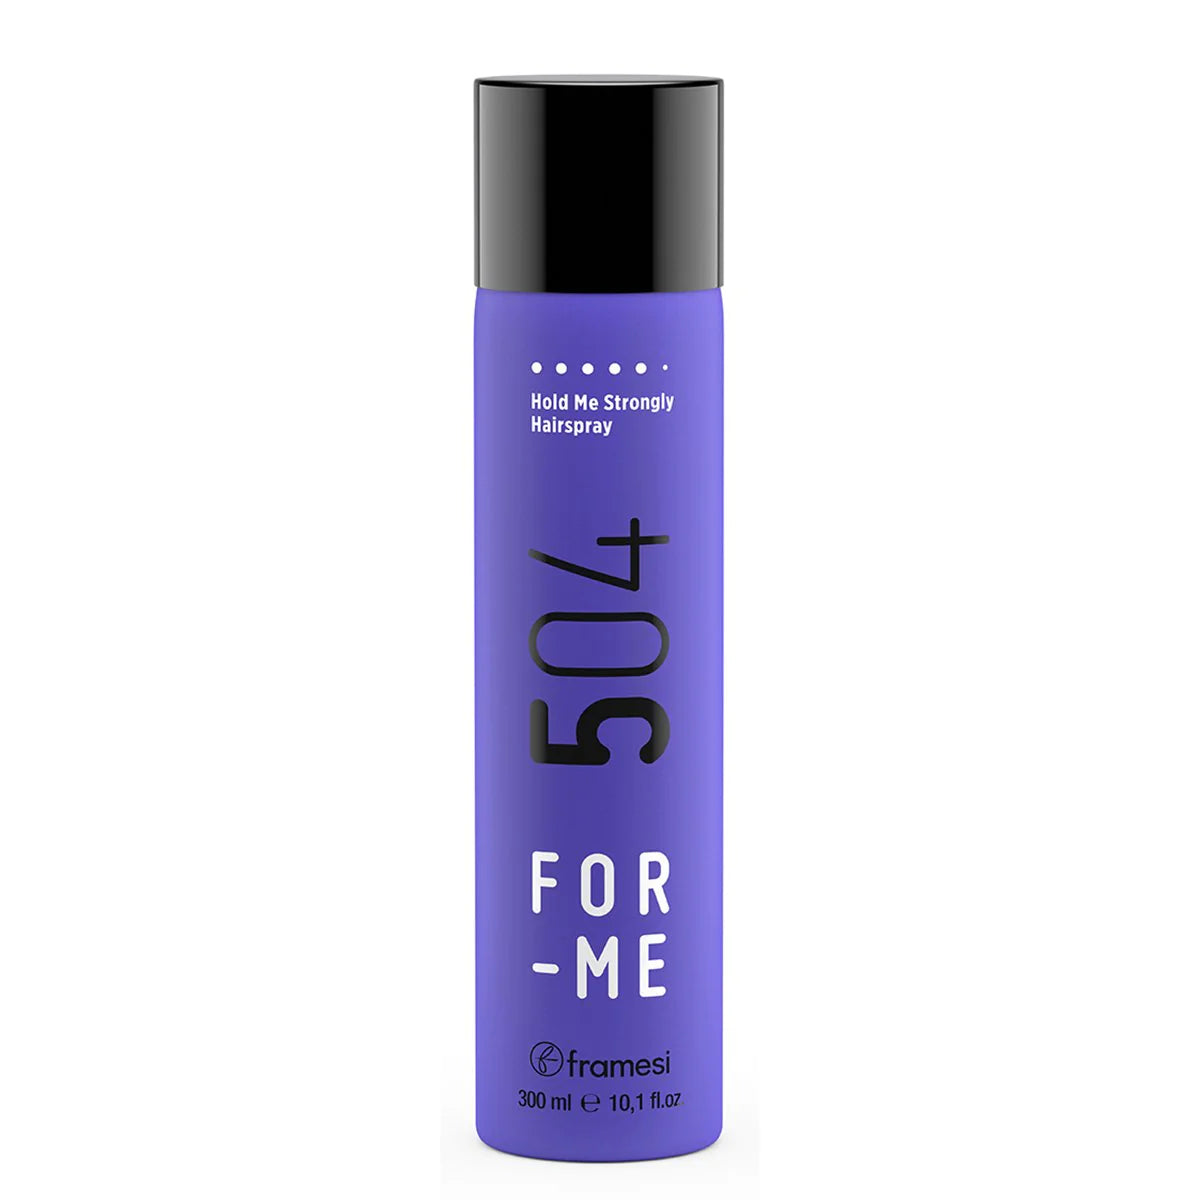 Framesi - FOR ME 504 Hold Me Strongly Hairspray